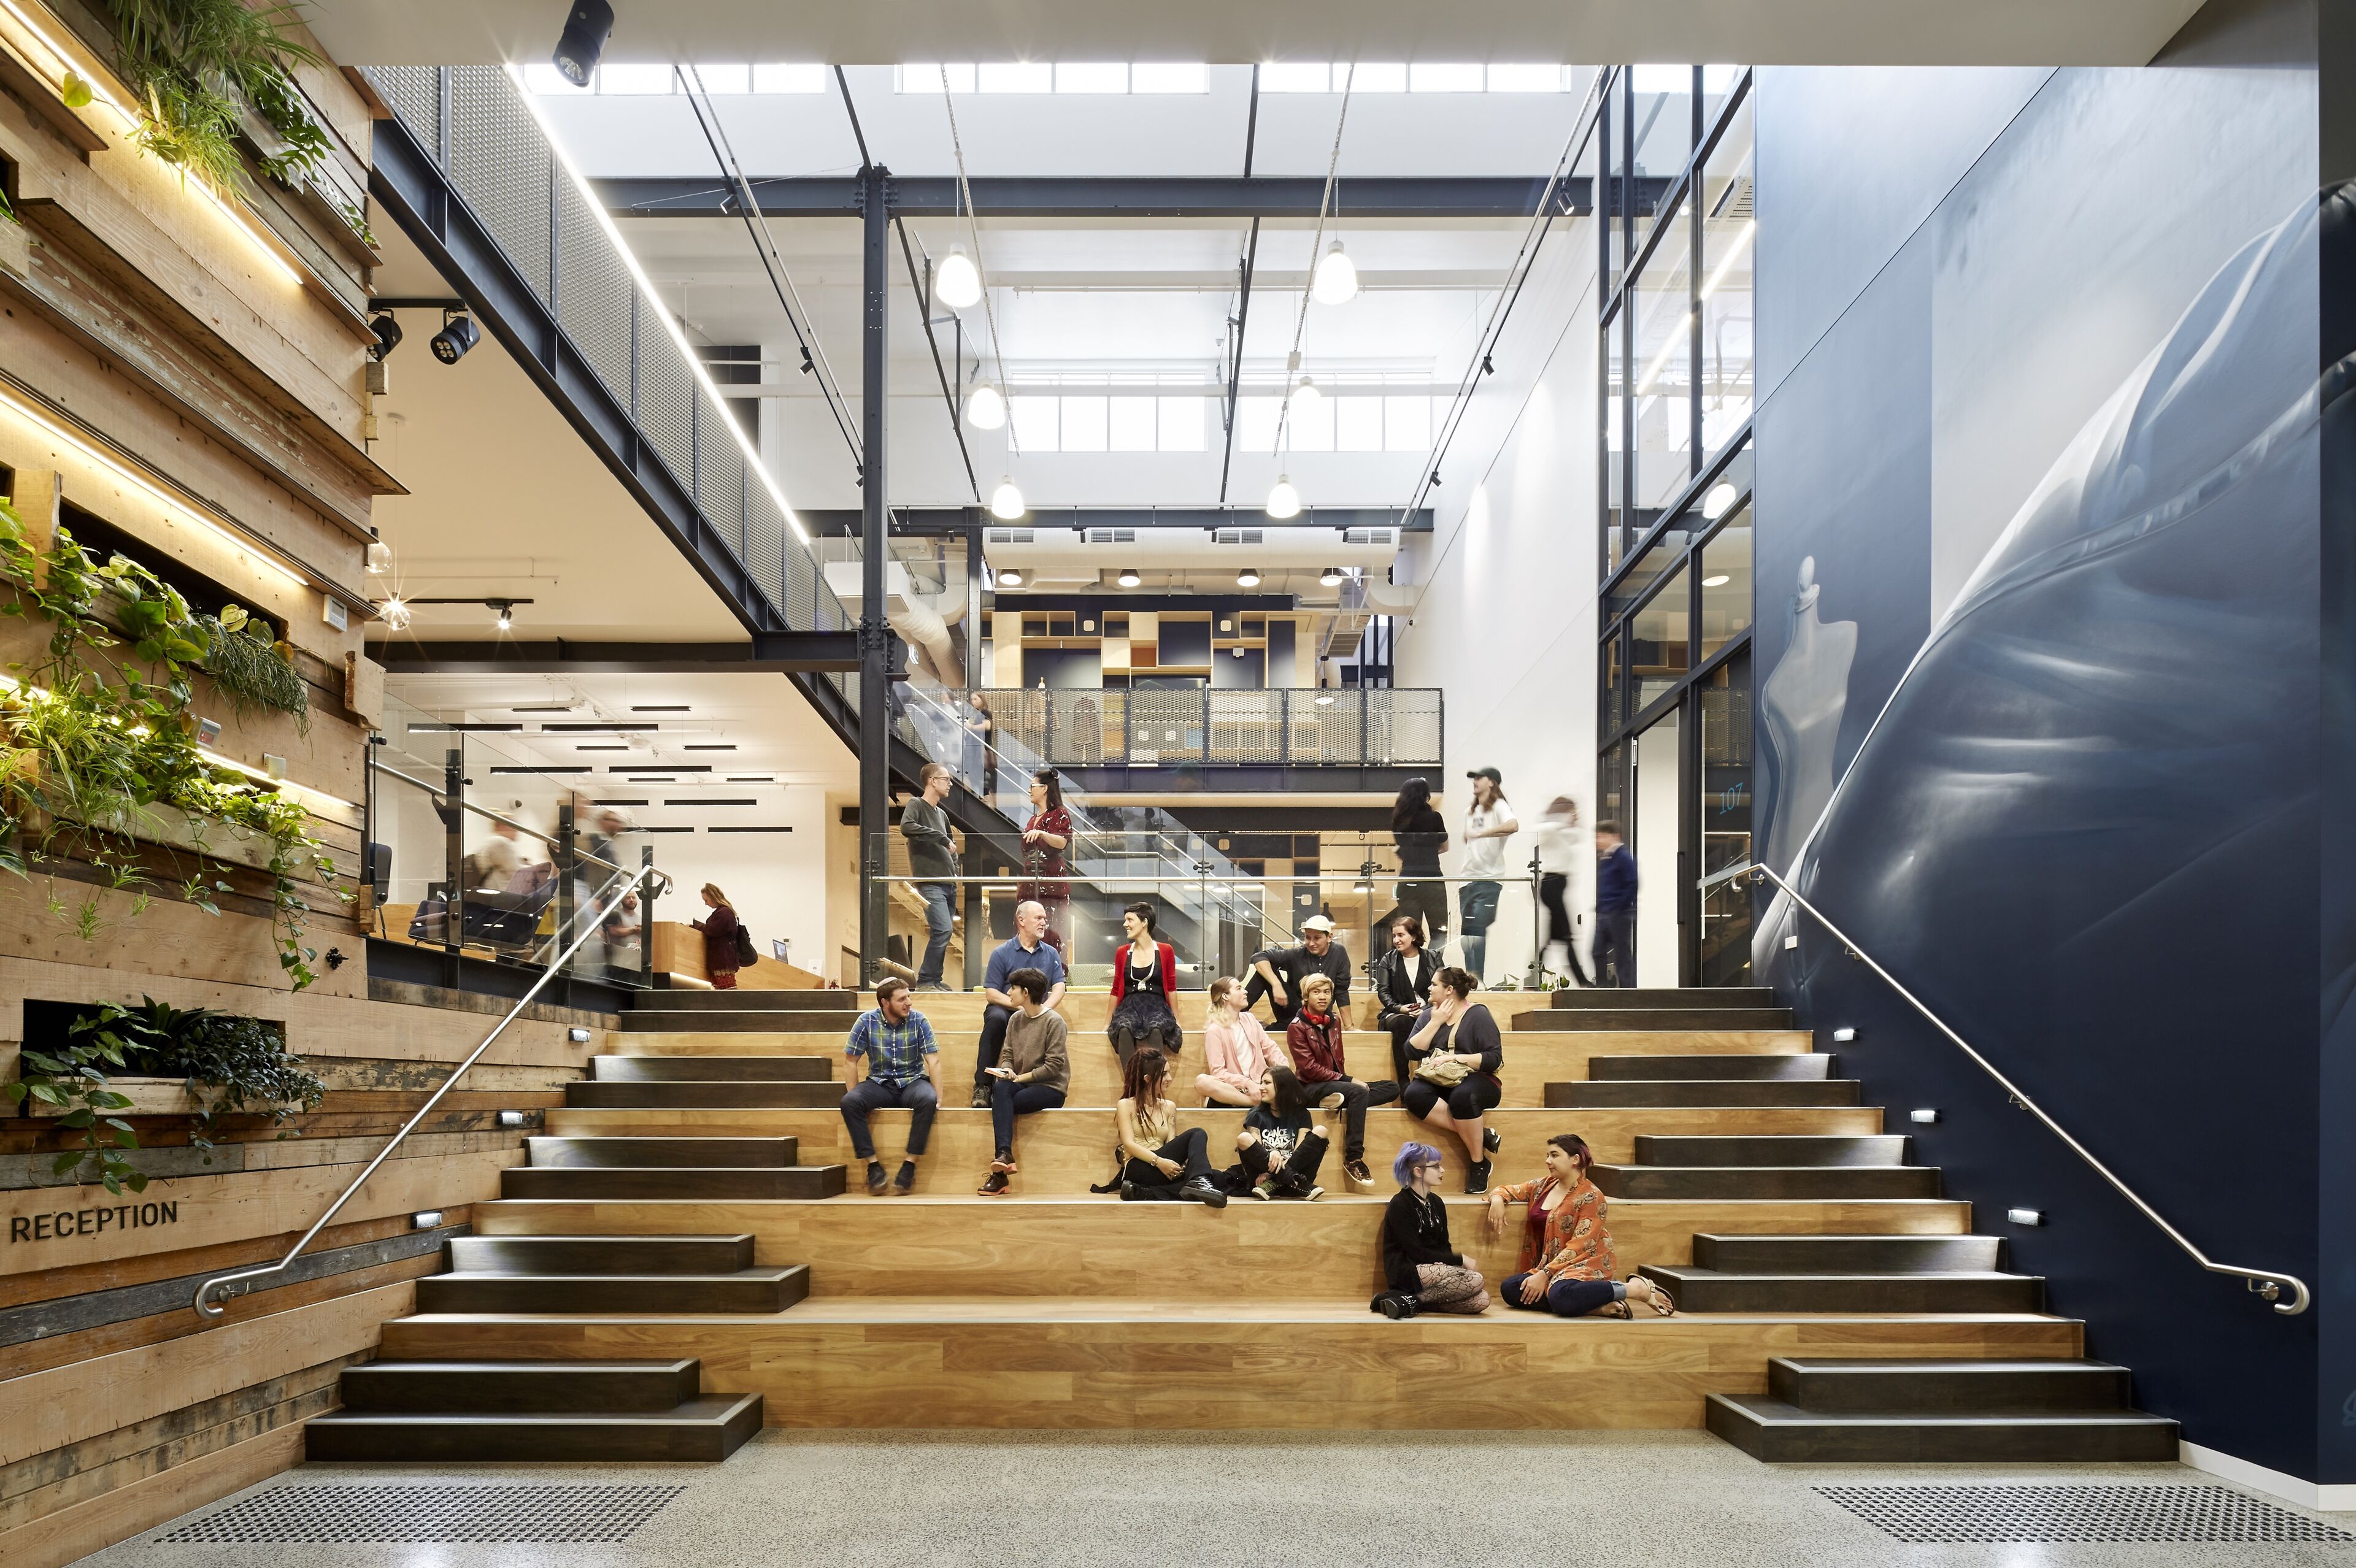 Students and staff engage in casual conversation on the amphitheater stairs of a modern atrium at LCI Melbourne Campus, surrounded by greenery and urban design.